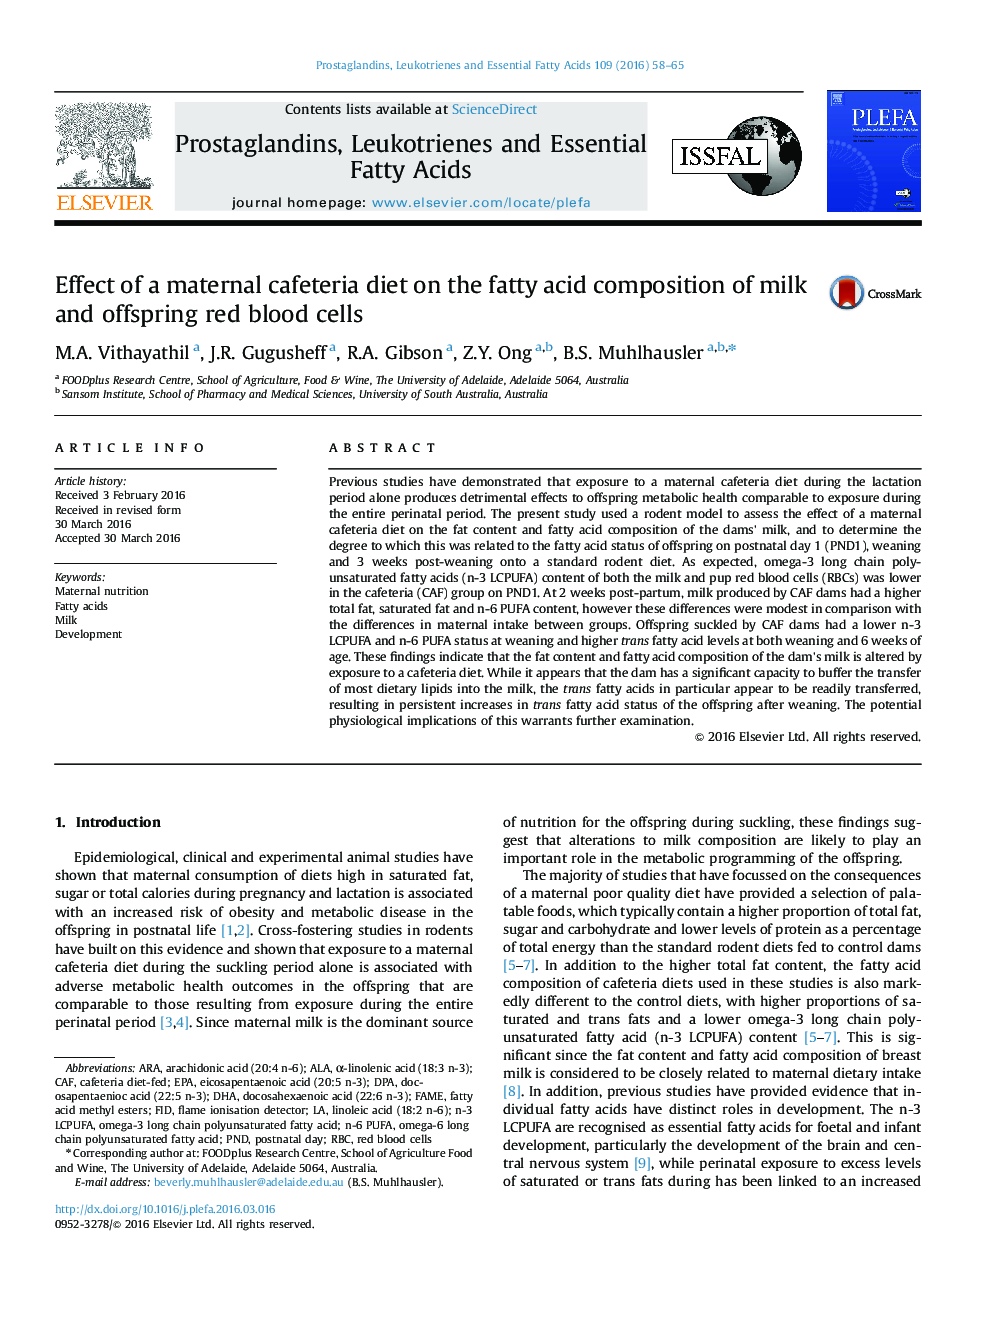 Effect of a maternal cafeteria diet on the fatty acid composition of milk and offspring red blood cells